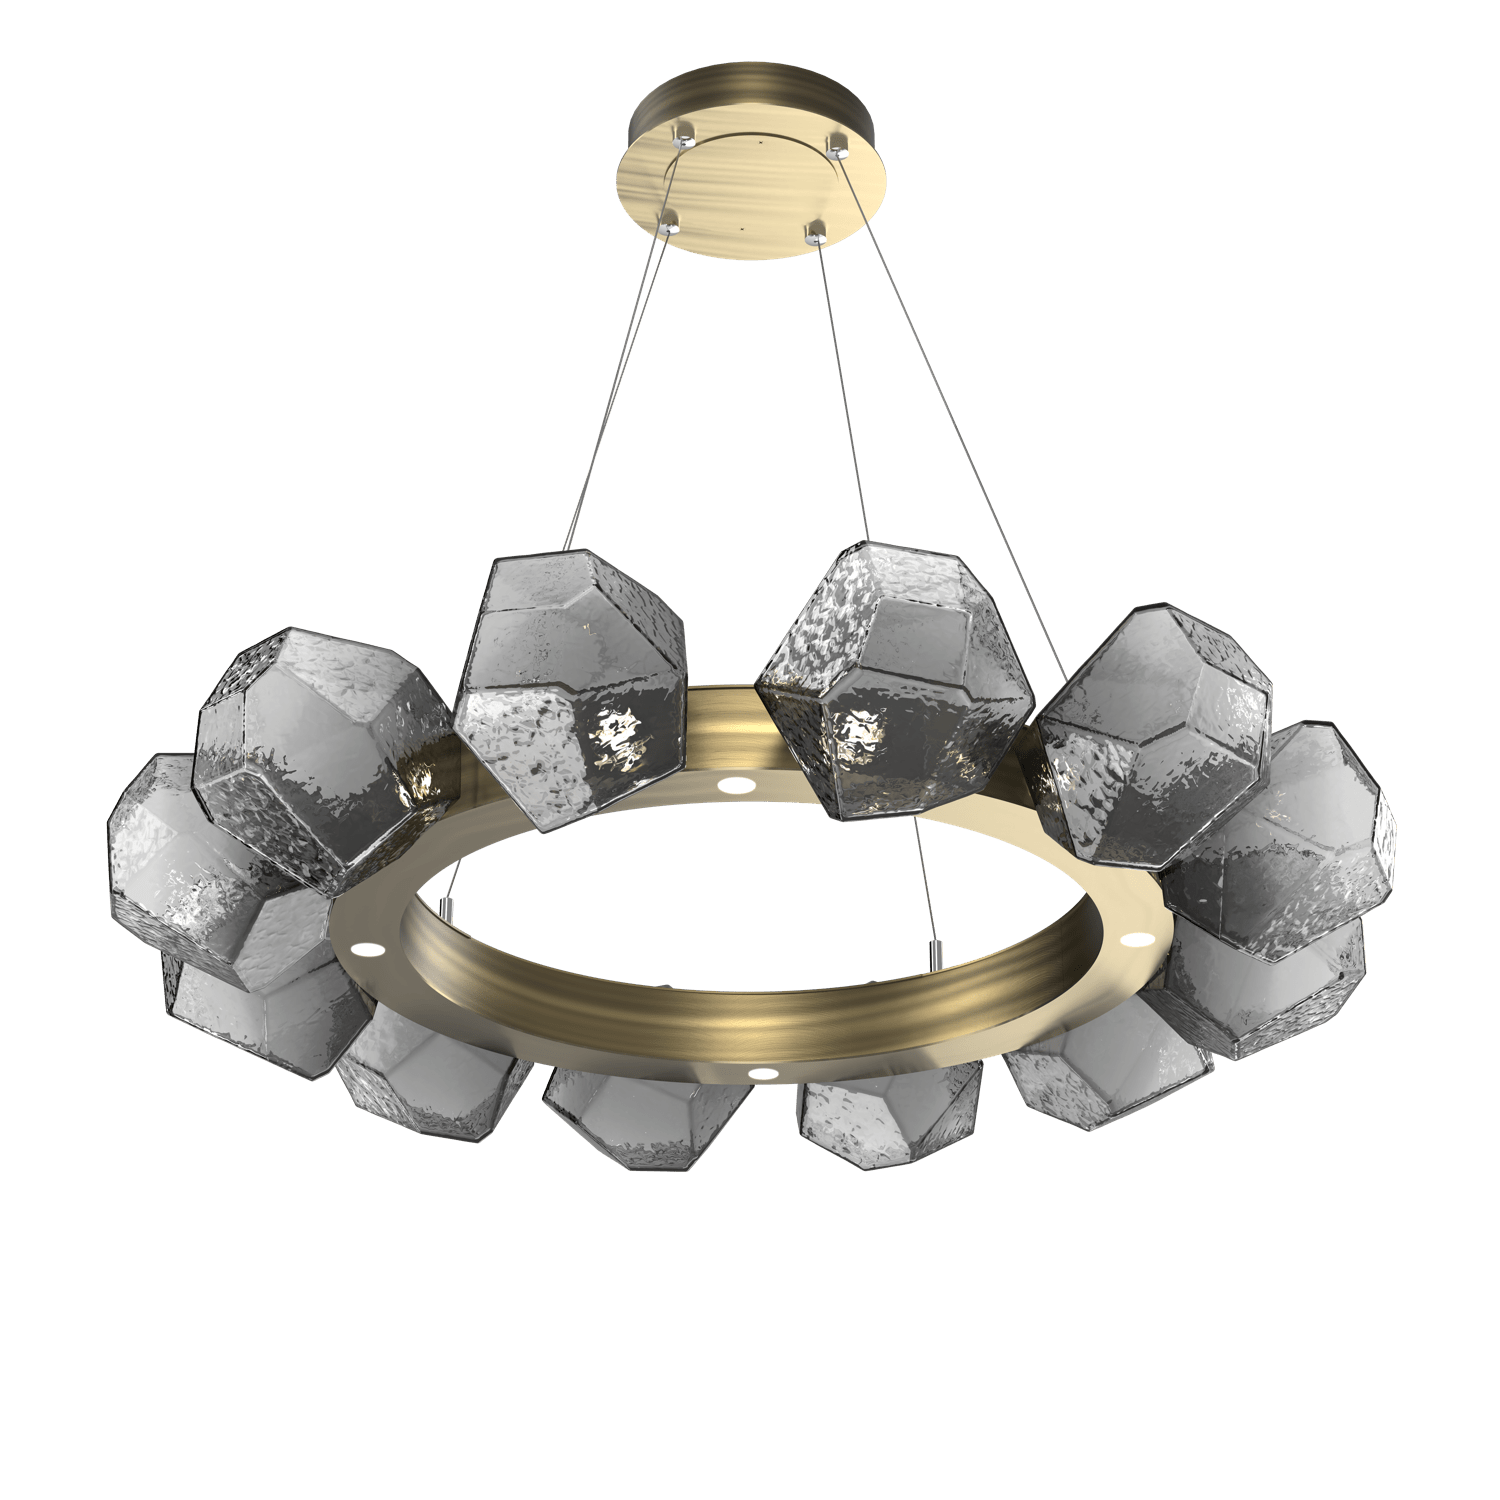 CHB0039-36-HB-S-Hammerton-Studio-Gem-36-inch-radial-ring-chandelier-with-heritage-brass-finish-and-smoke-blown-glass-shades-and-LED-lamping